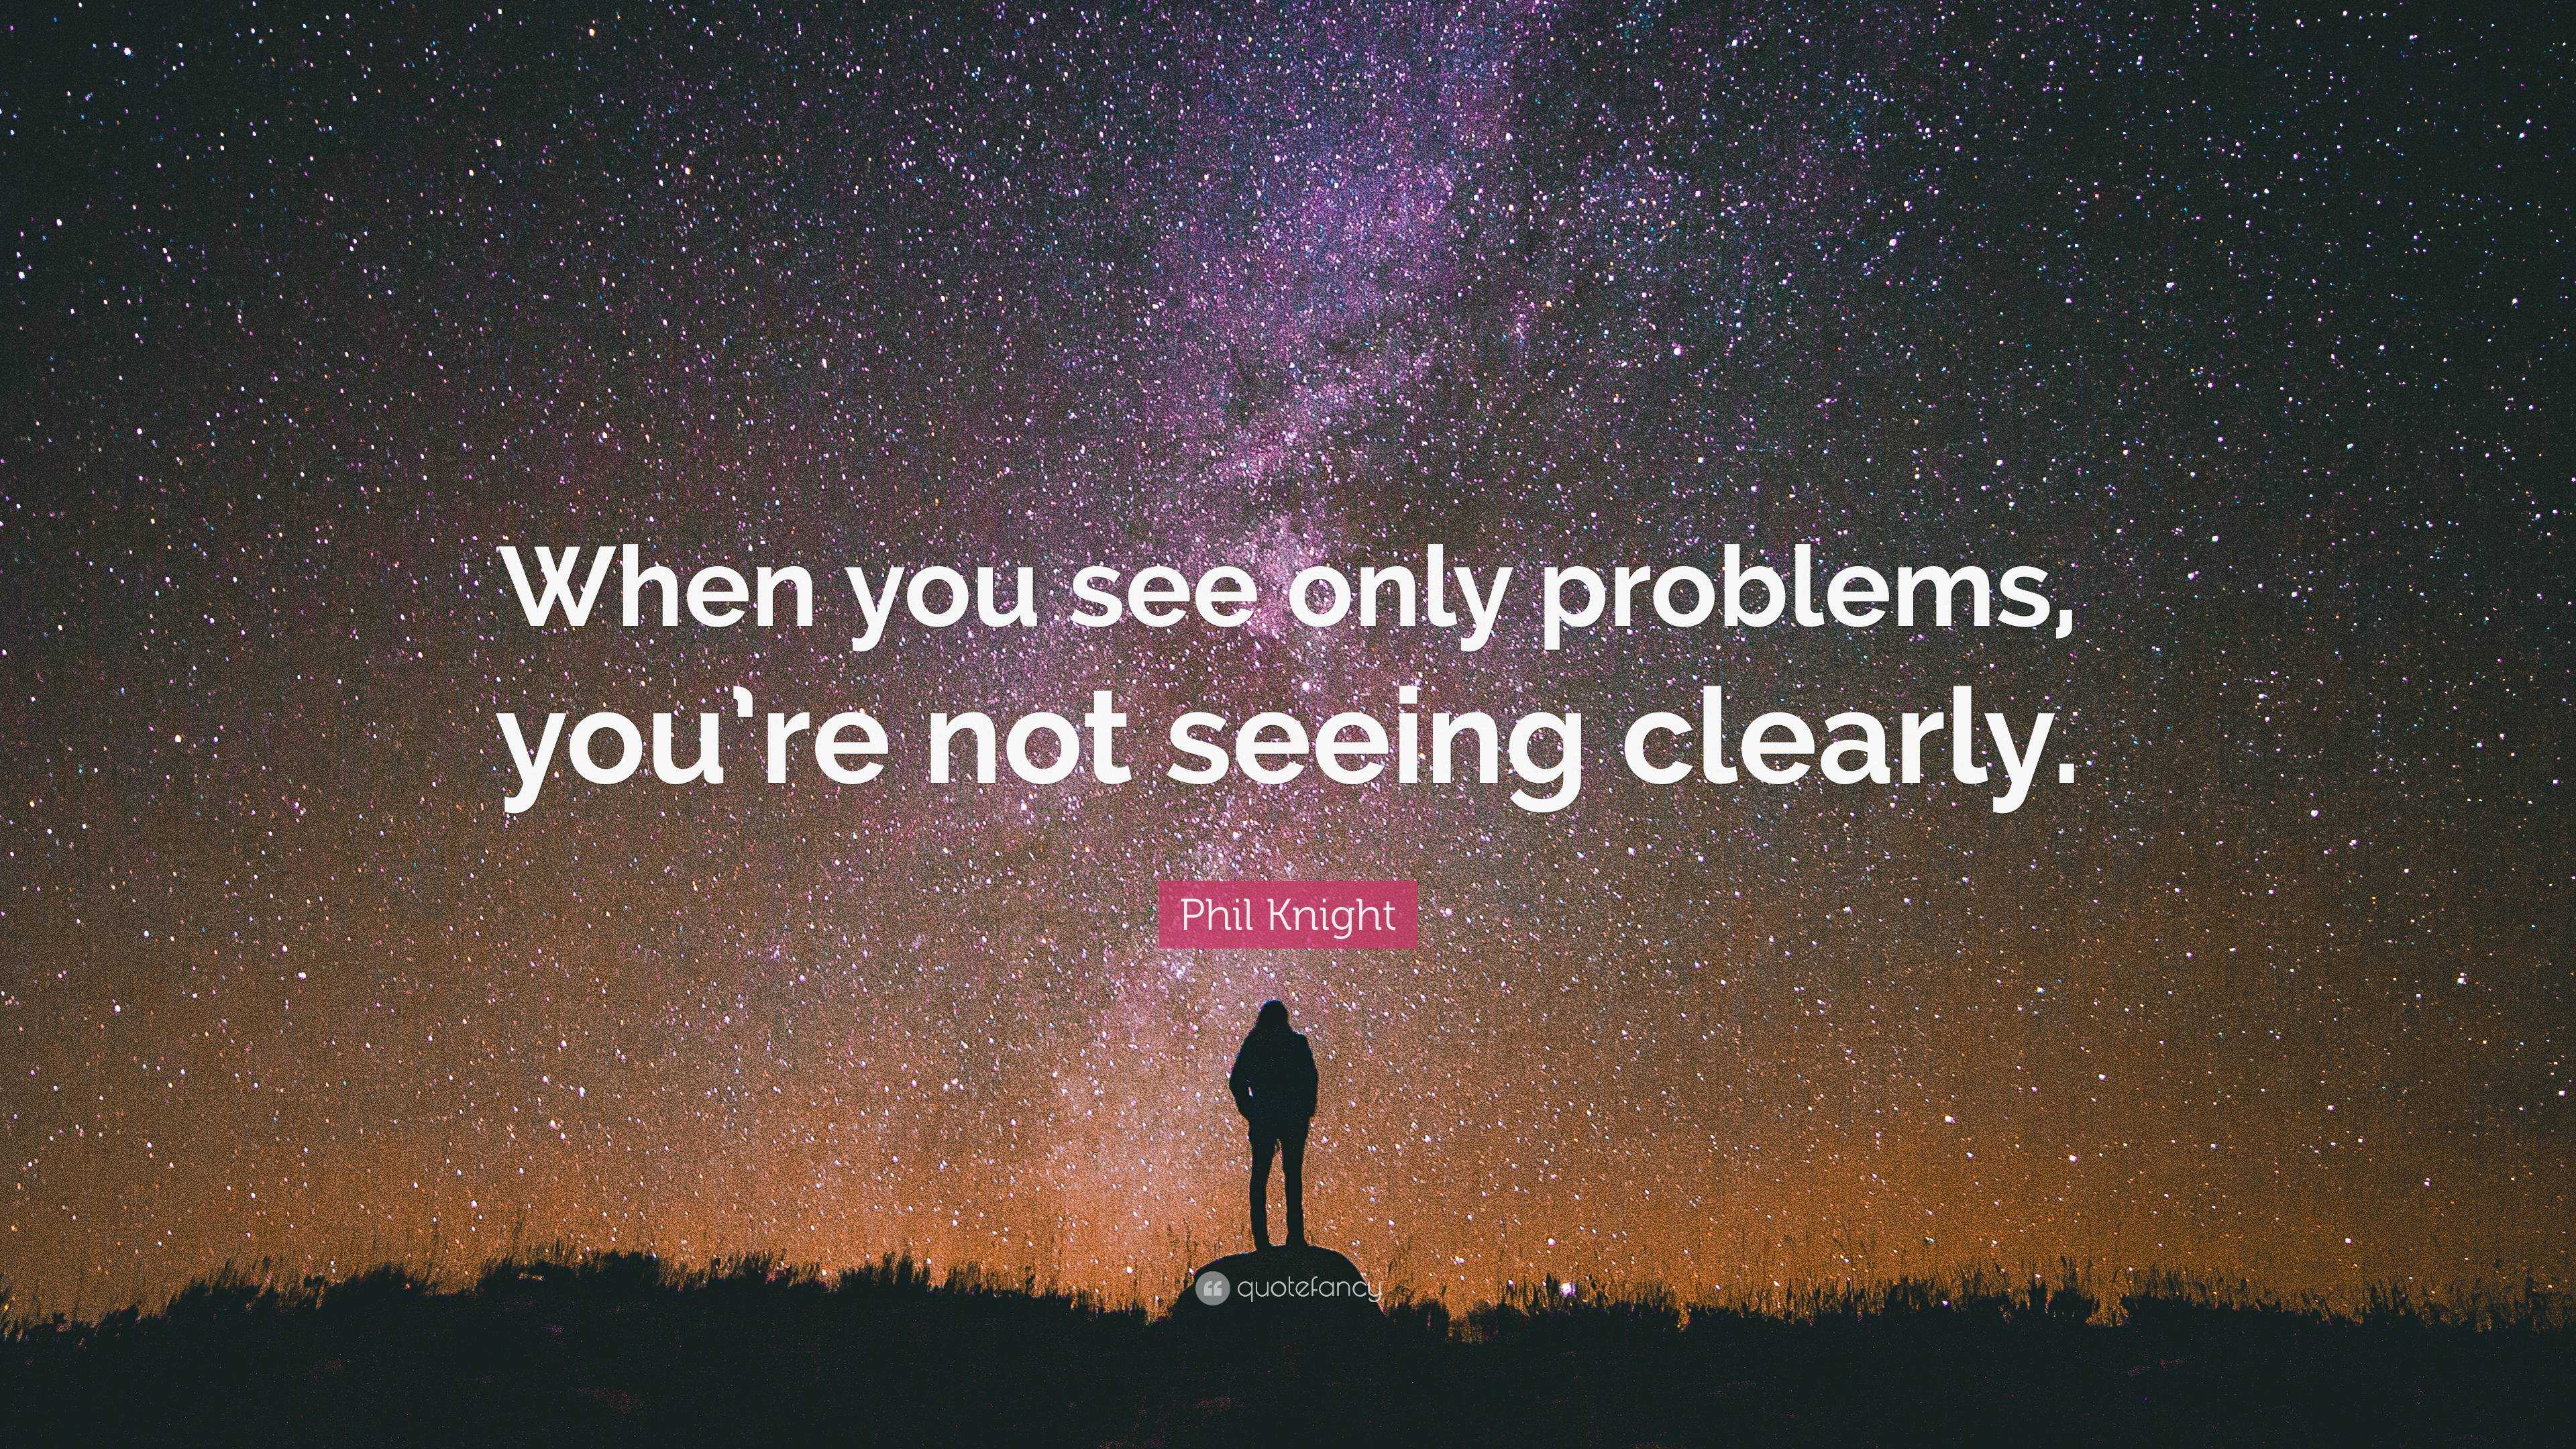 Phil Knight Quote: When you see only problems you re not seeing clearly